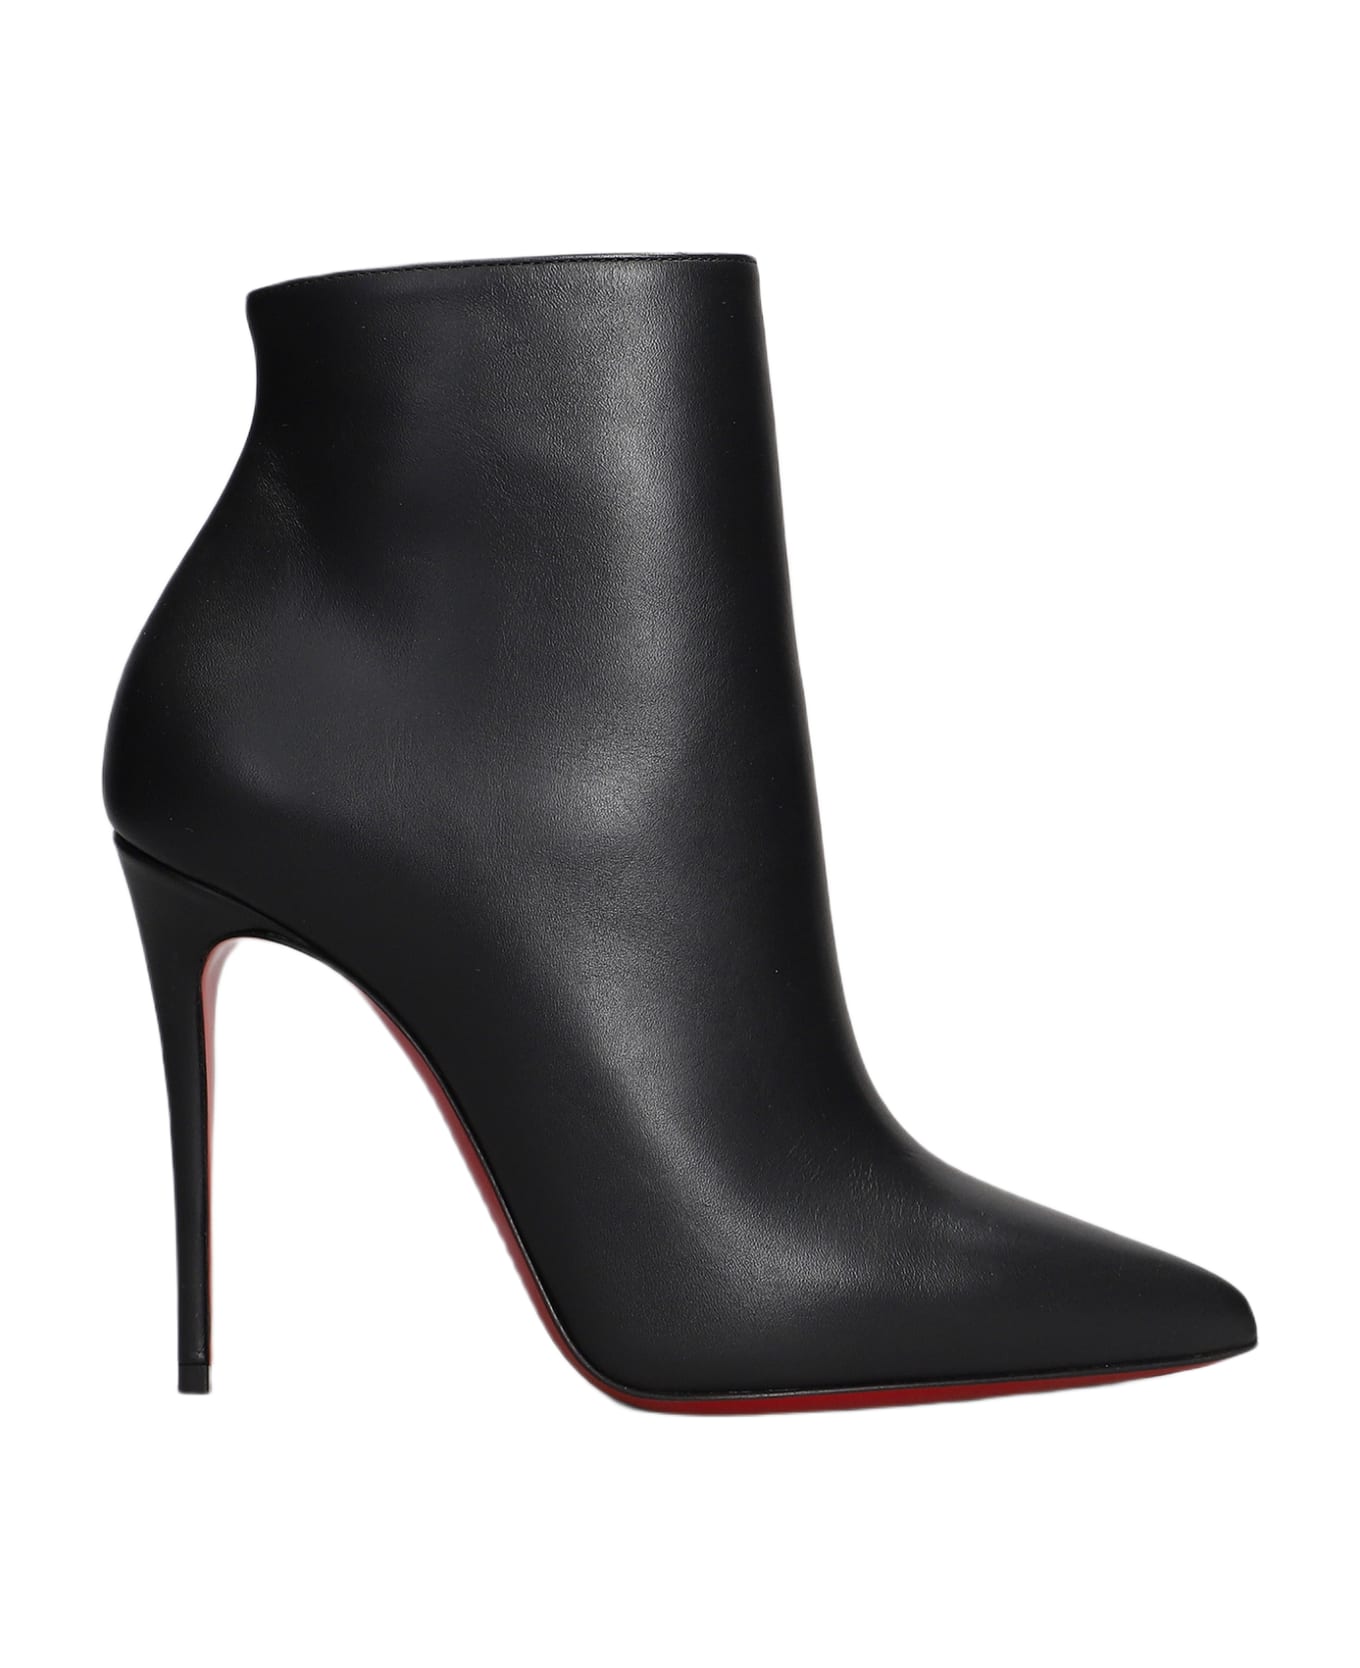 Christian Louboutin So Kate Booty High Heels Ankle Boots In Black Leather - black